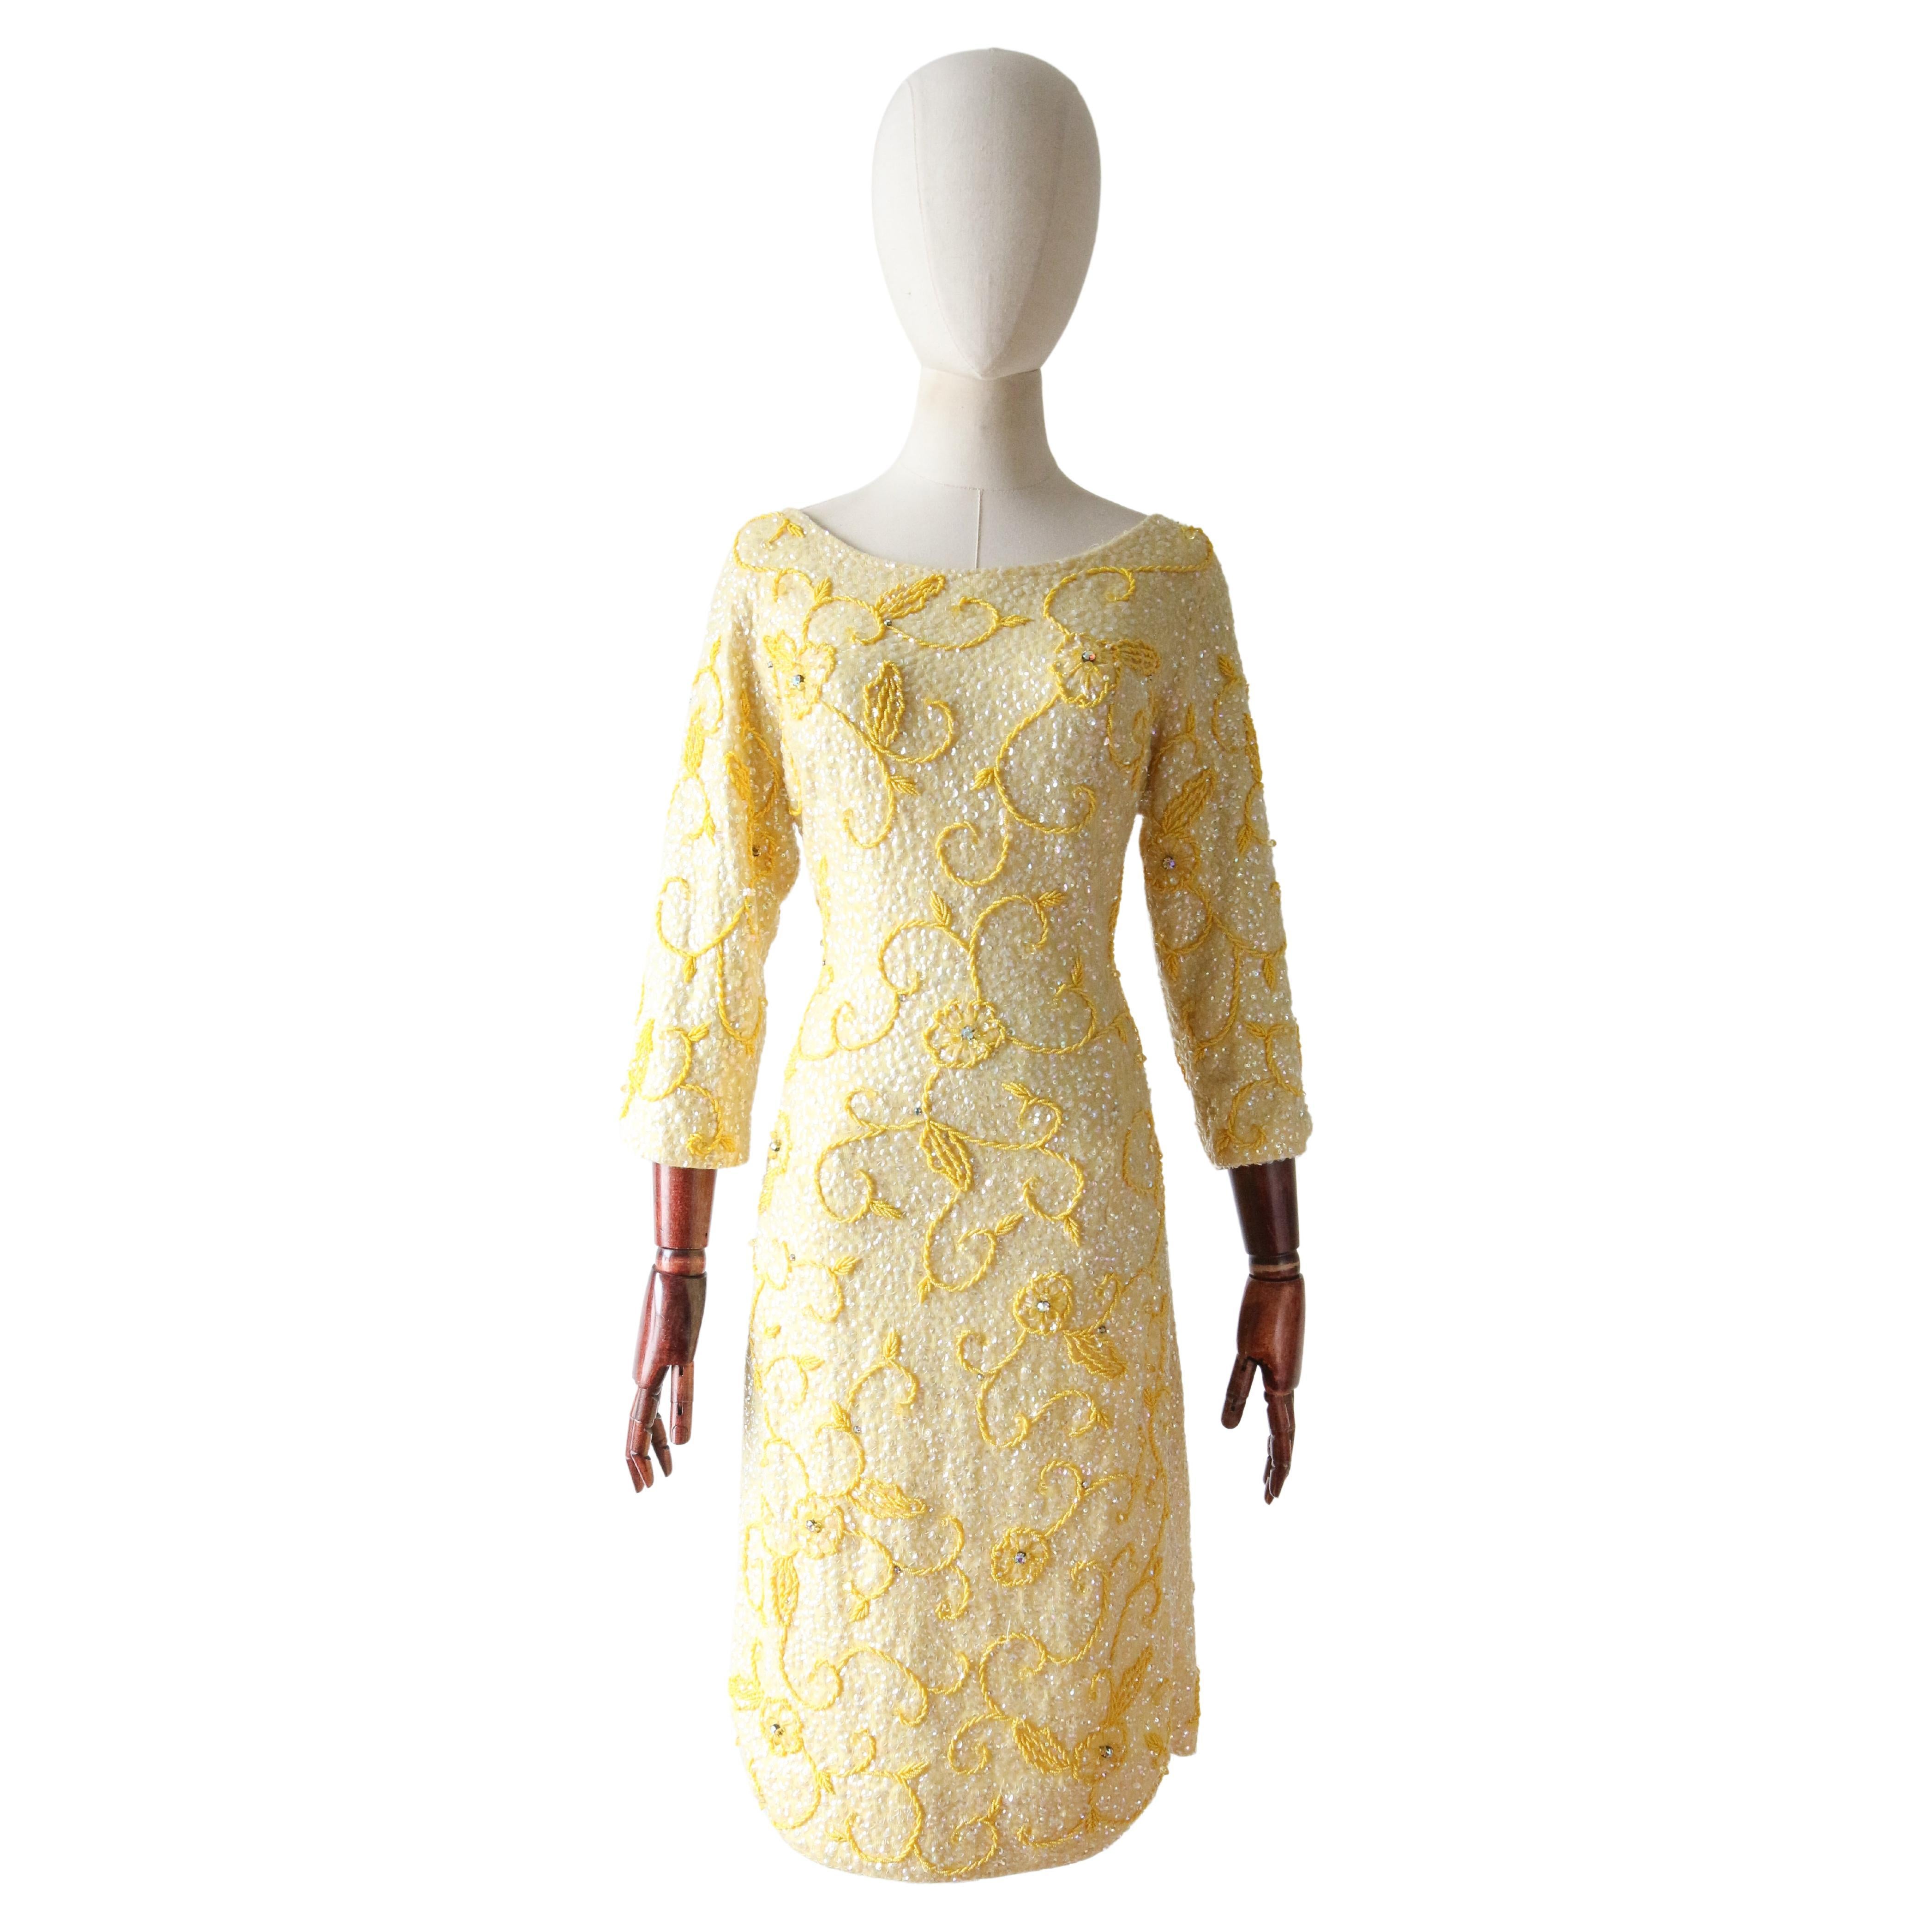 Vintage 1960's yellow sequin beaded cocktail dress wiggle dress UK 12 US 8  For Sale